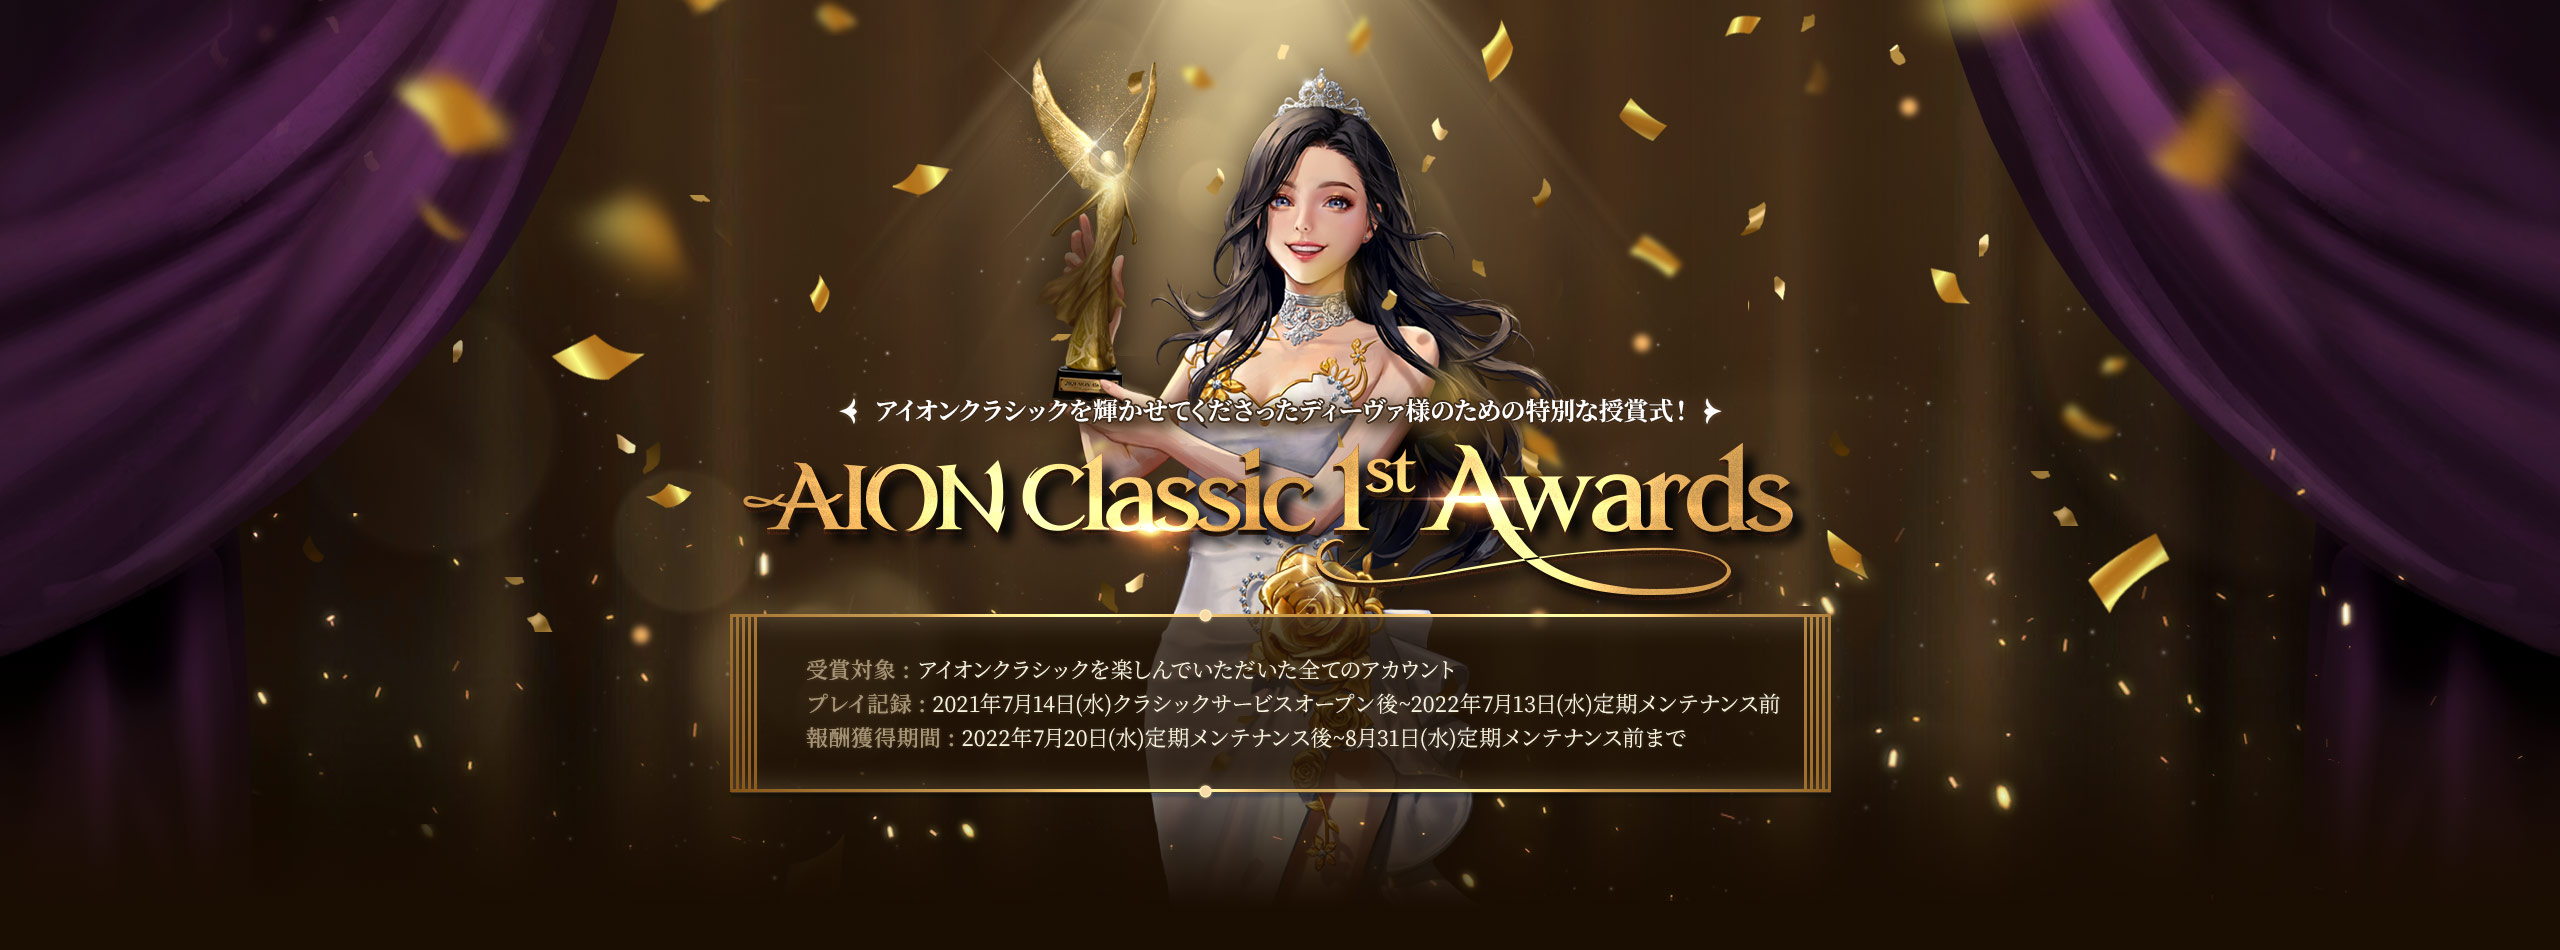 AION CLASSIC 1st Awards